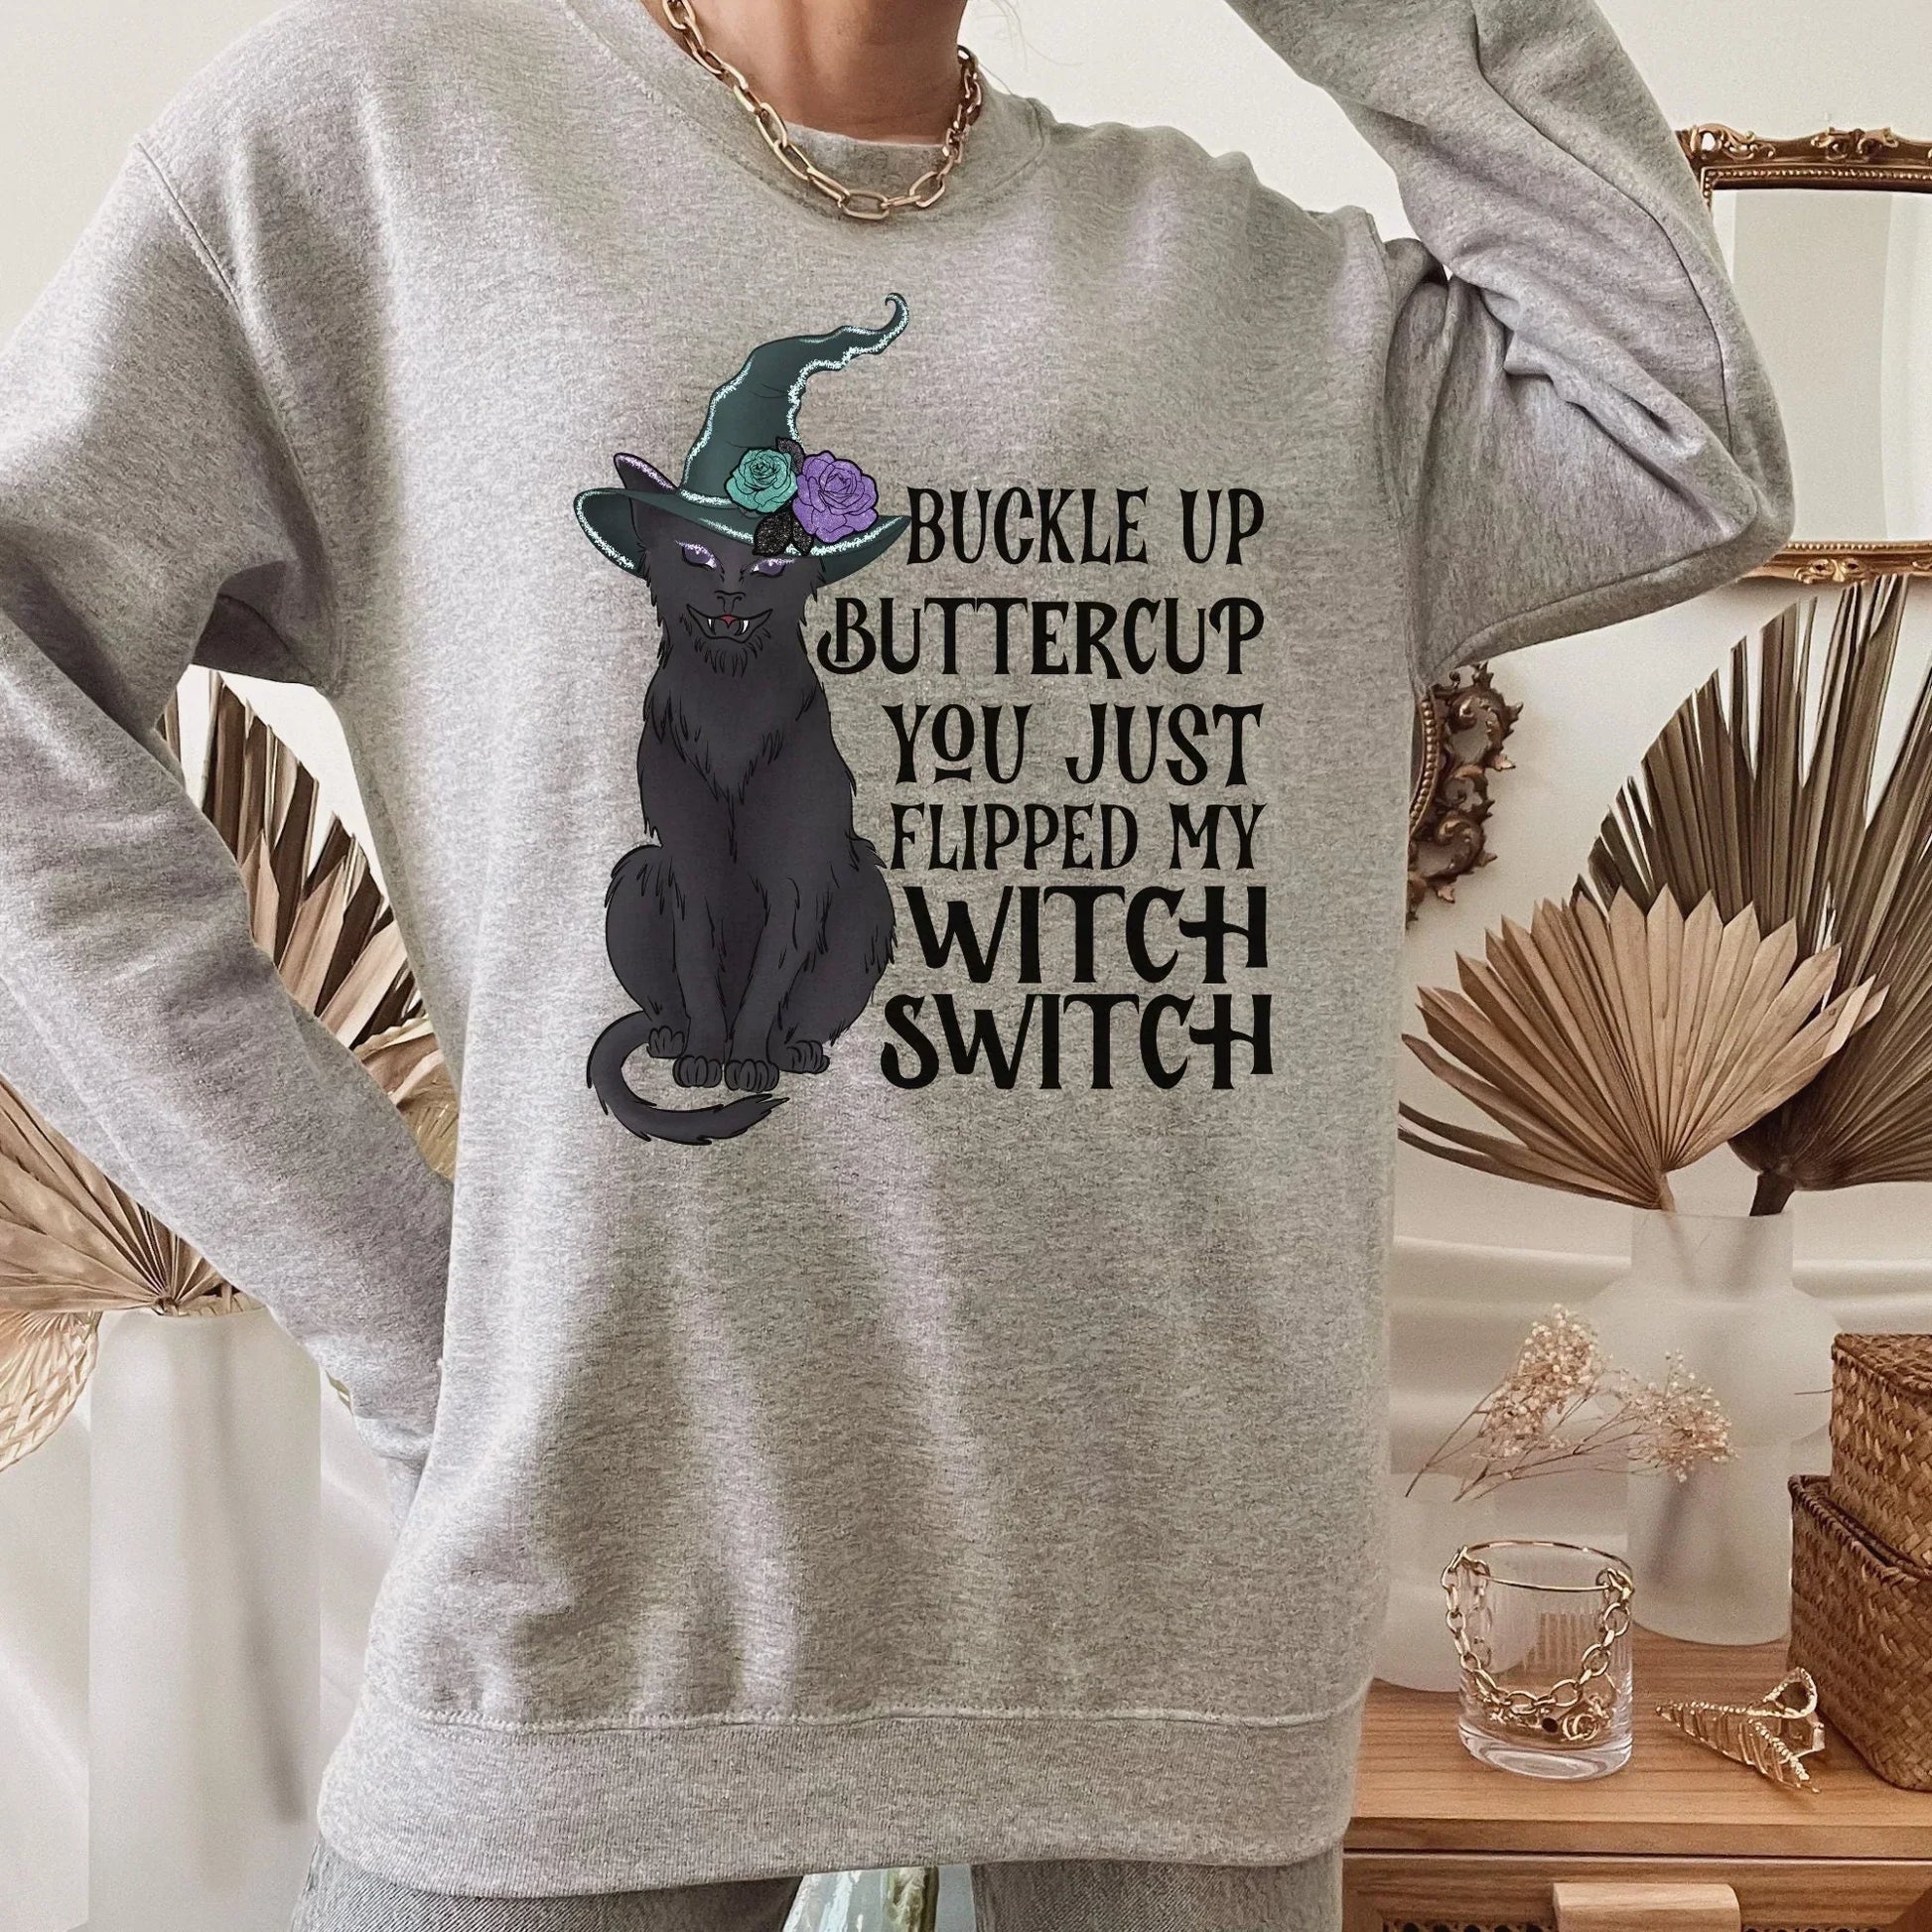 Funny Halloween Shirt, Black Cat Shirt, Gothic Shirt, Witchy Vibes, Pastel Halloween Sweatshirt, Magical Witch Hat Cat Shirt, Goth Style HMDesignStudioUS